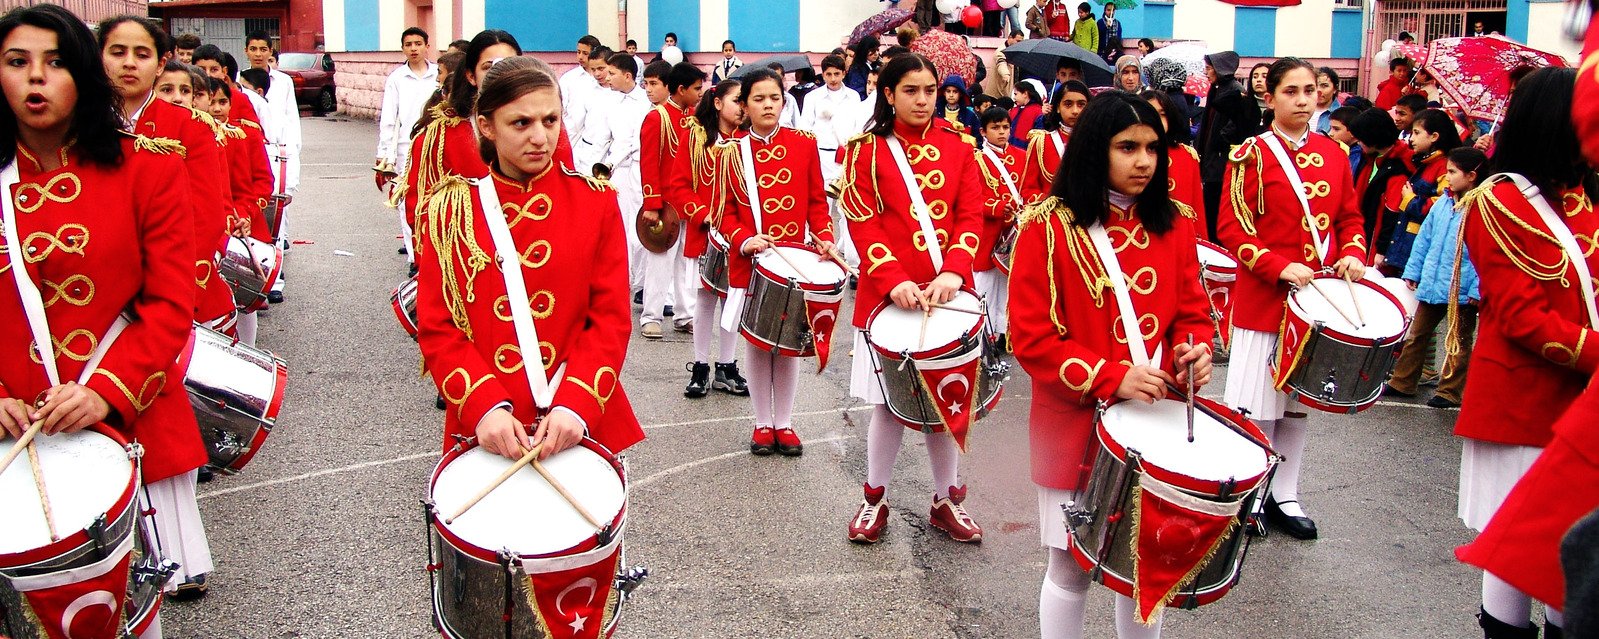 a group of people dressed in red marching uniforms marching down a street